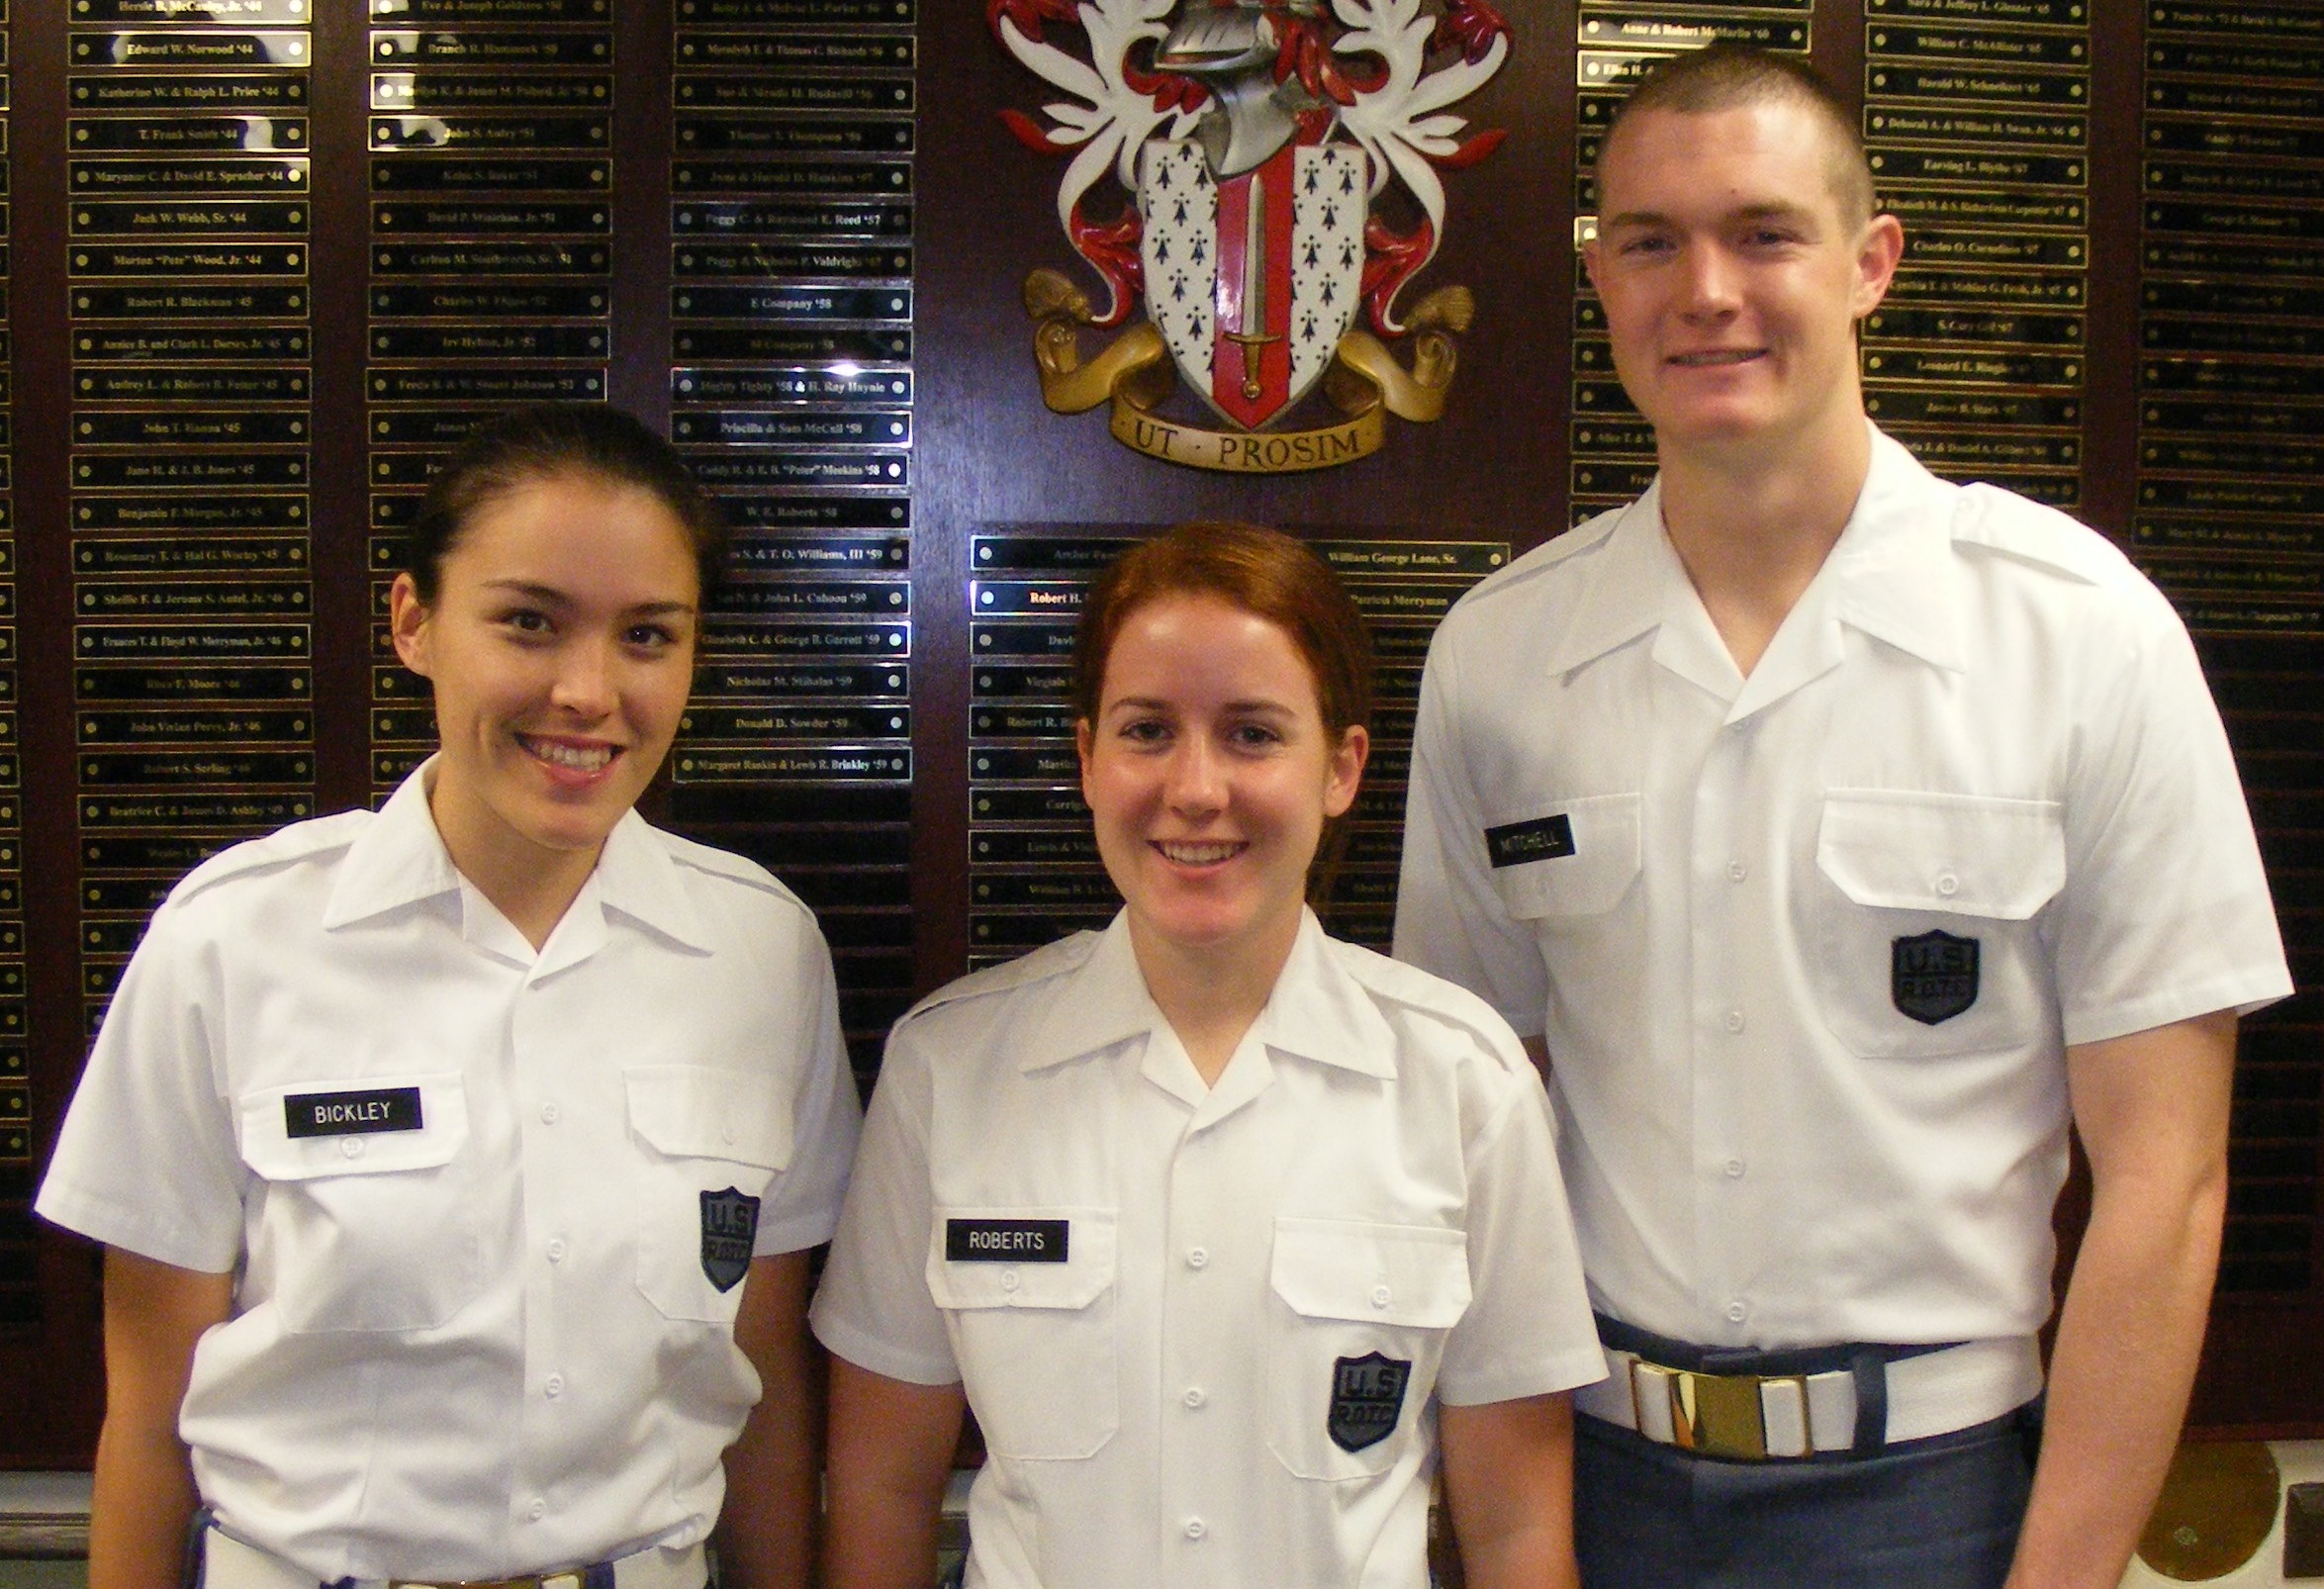 Cadets Amelia Bickley, Leah Roberts, and Carl Mitchell shown in Brodie Hall